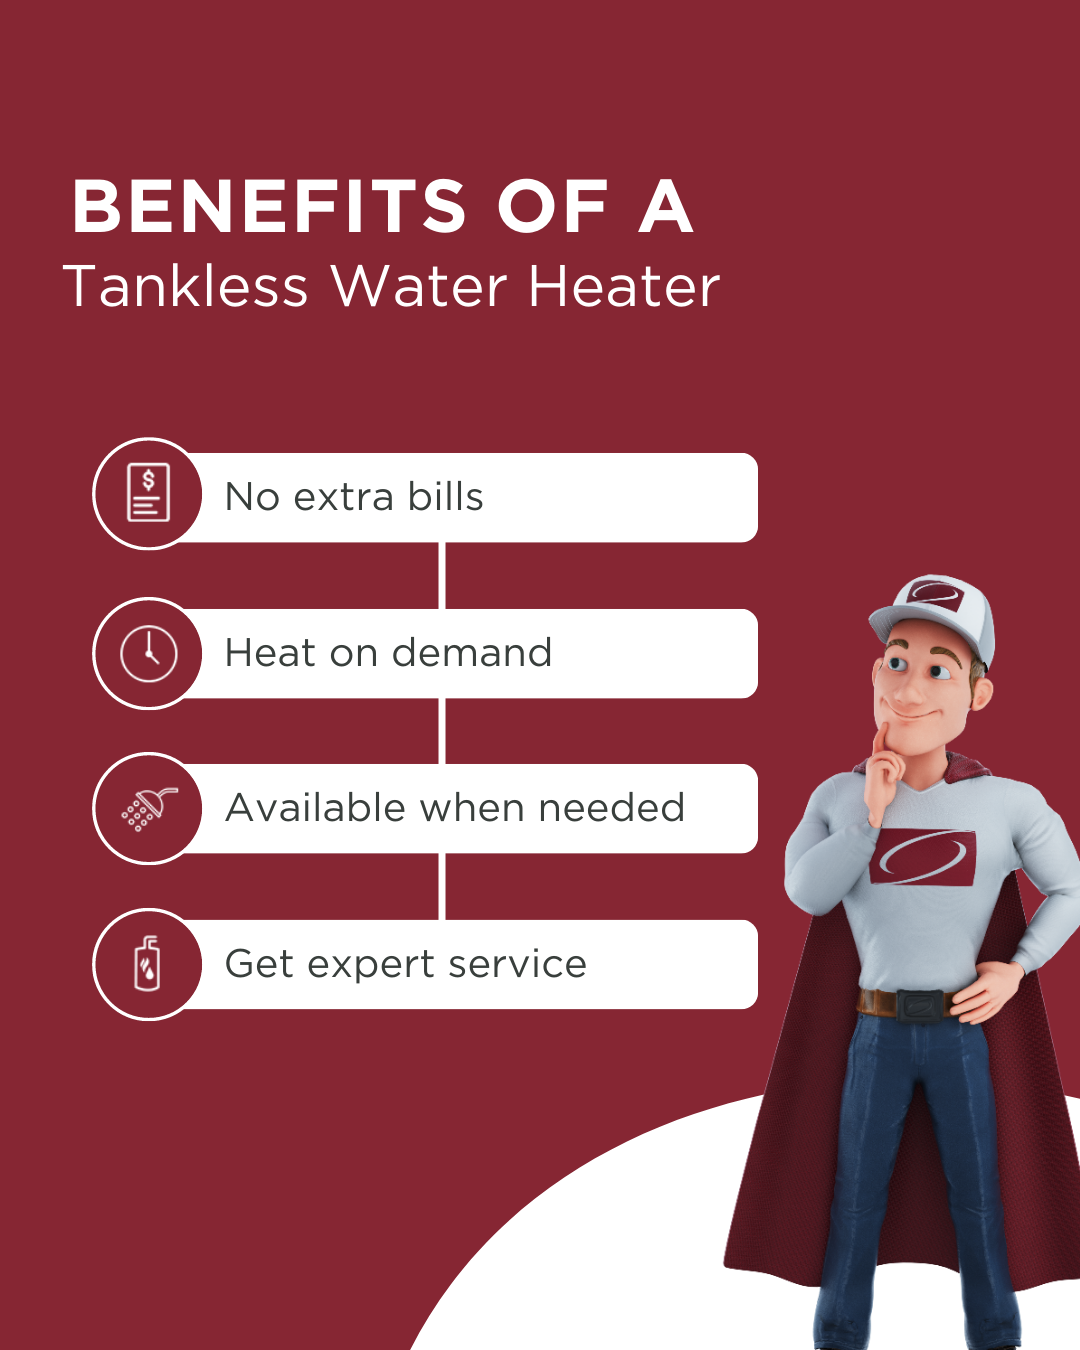 Benefits of a tankless water heater system.